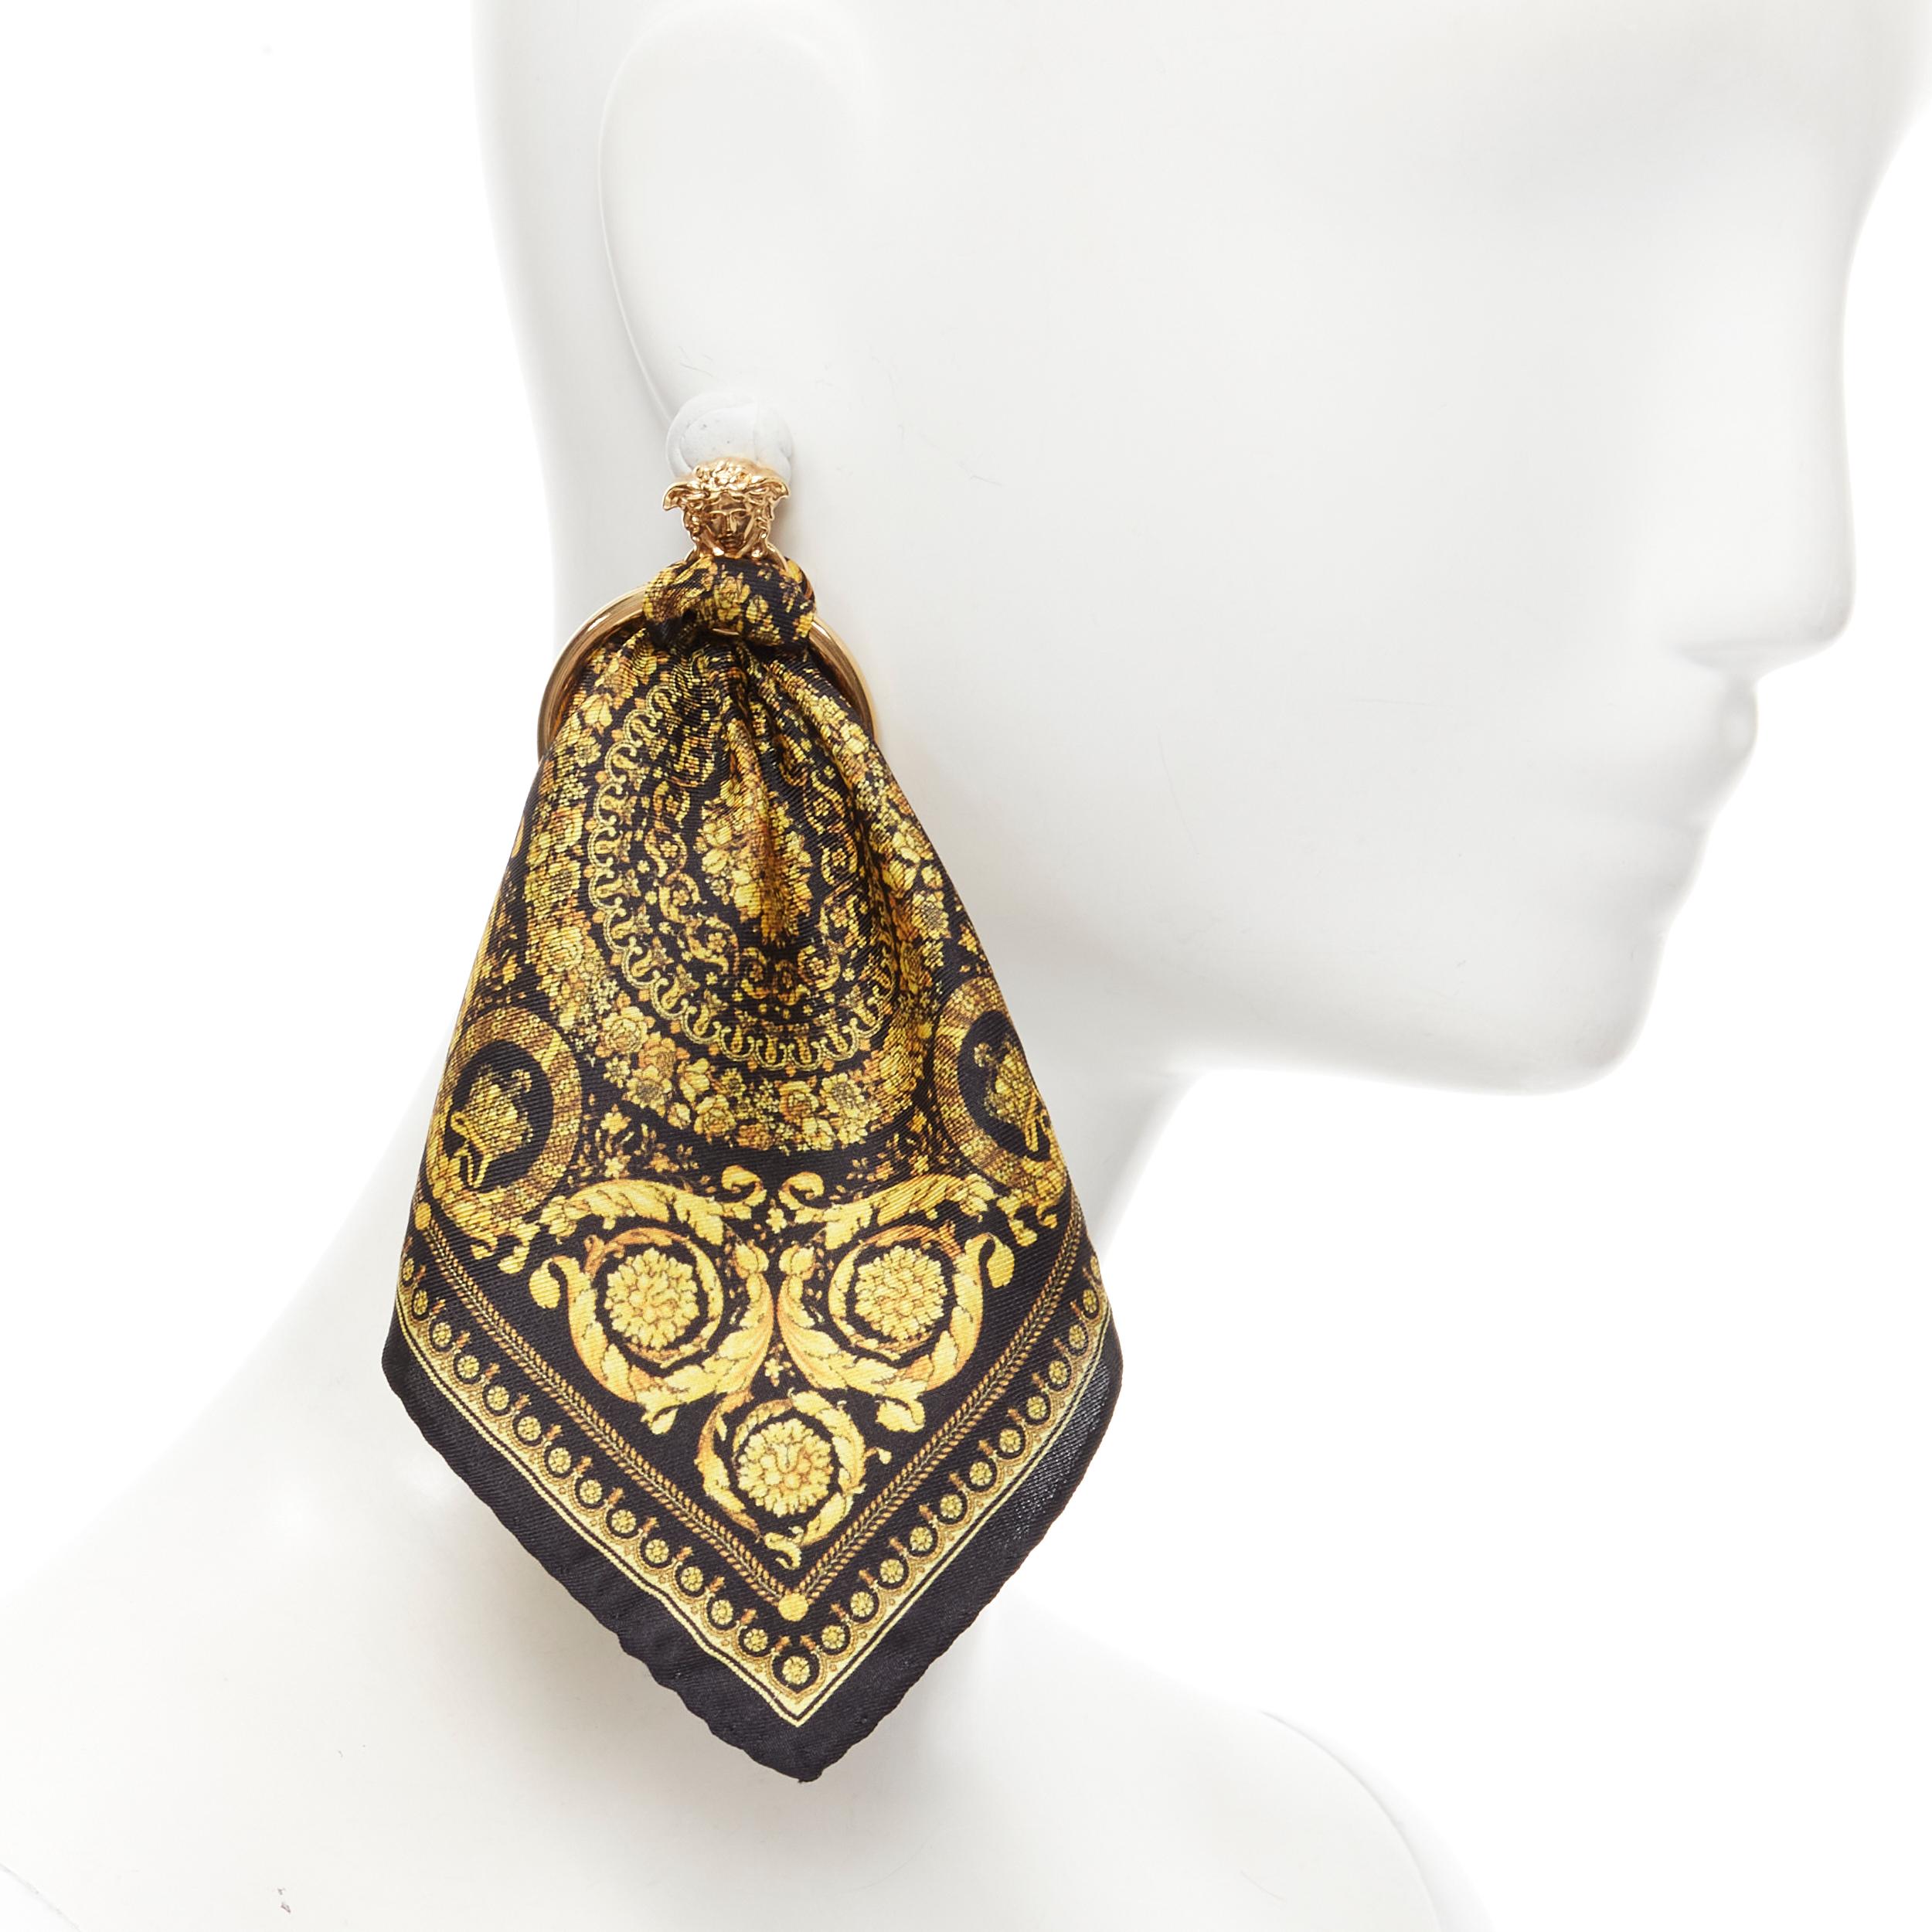 new VERSACE Barocco black gold baroque print scarf convertible Medusa earring 
Reference: TGAS/B01473 
Brand: Versace 
Designer: Donatella Versace 
Collection: 2018 Runway 
As seen on: Beyonce 
Material: Brass 
Color: Black
Closure: Pin 
Extra